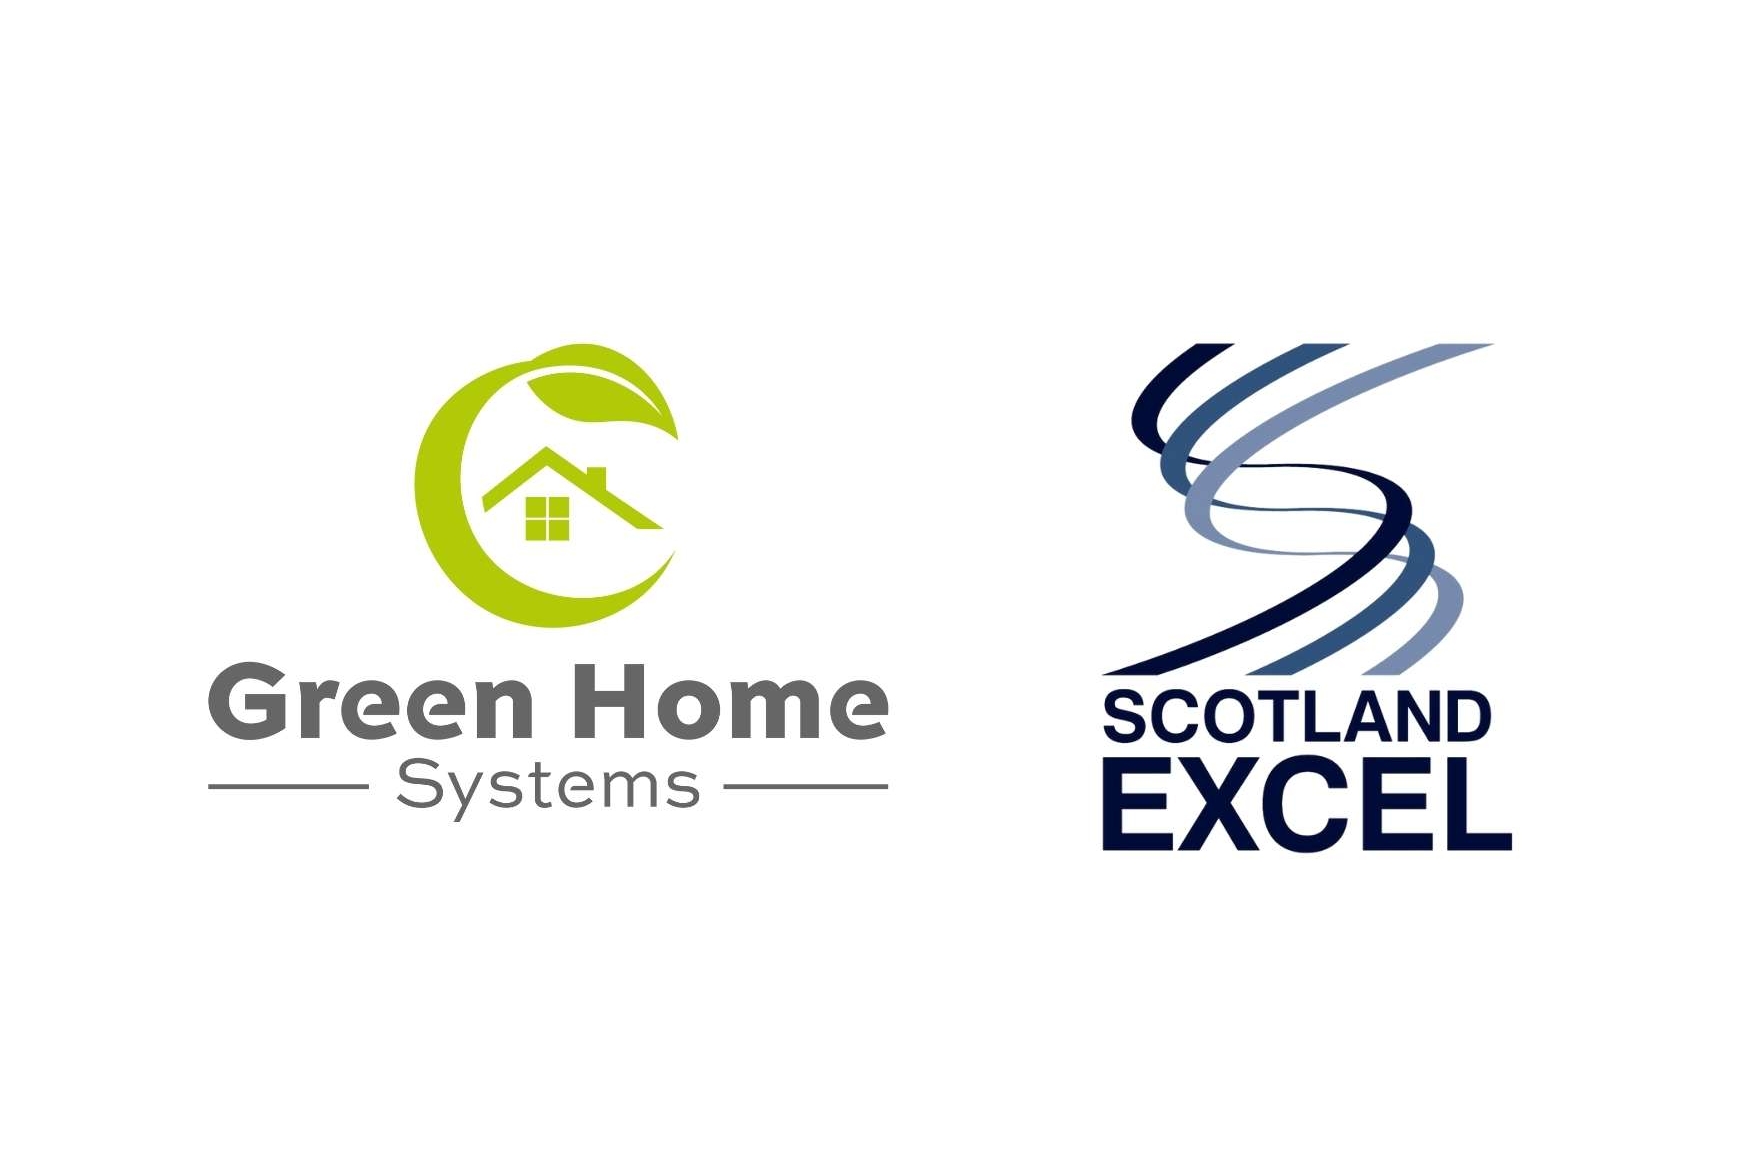 Green Home Systems appointed to £800m framework contract